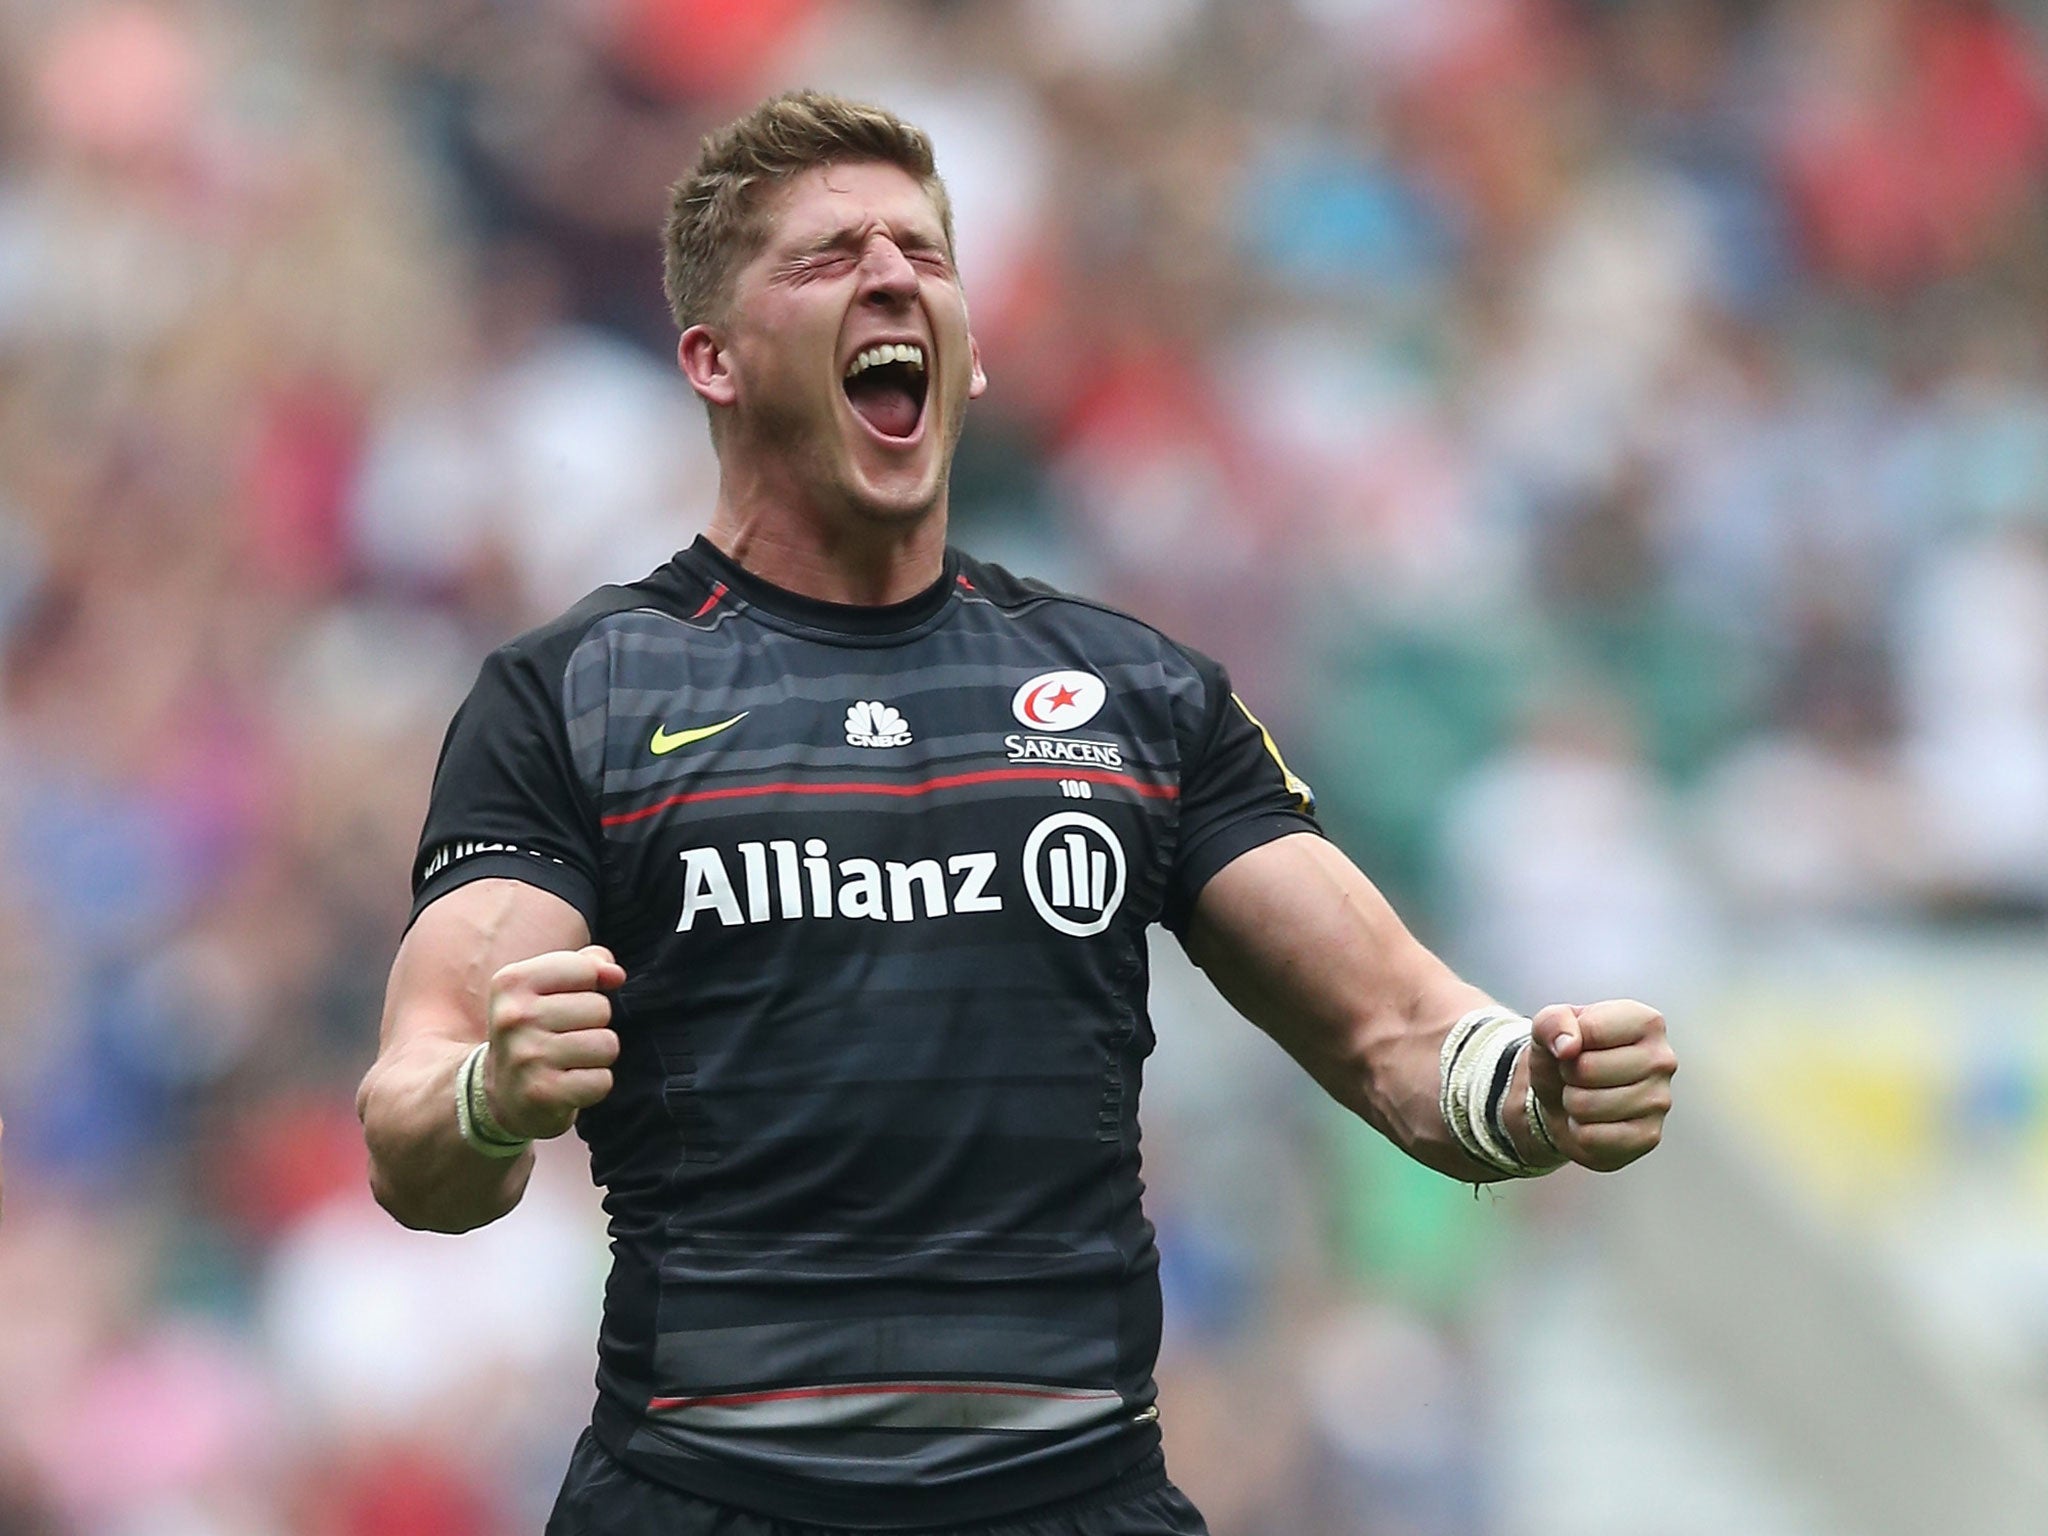 David Strettle plays ahead of Chris Ashton on the wing for Saracens against Northampton